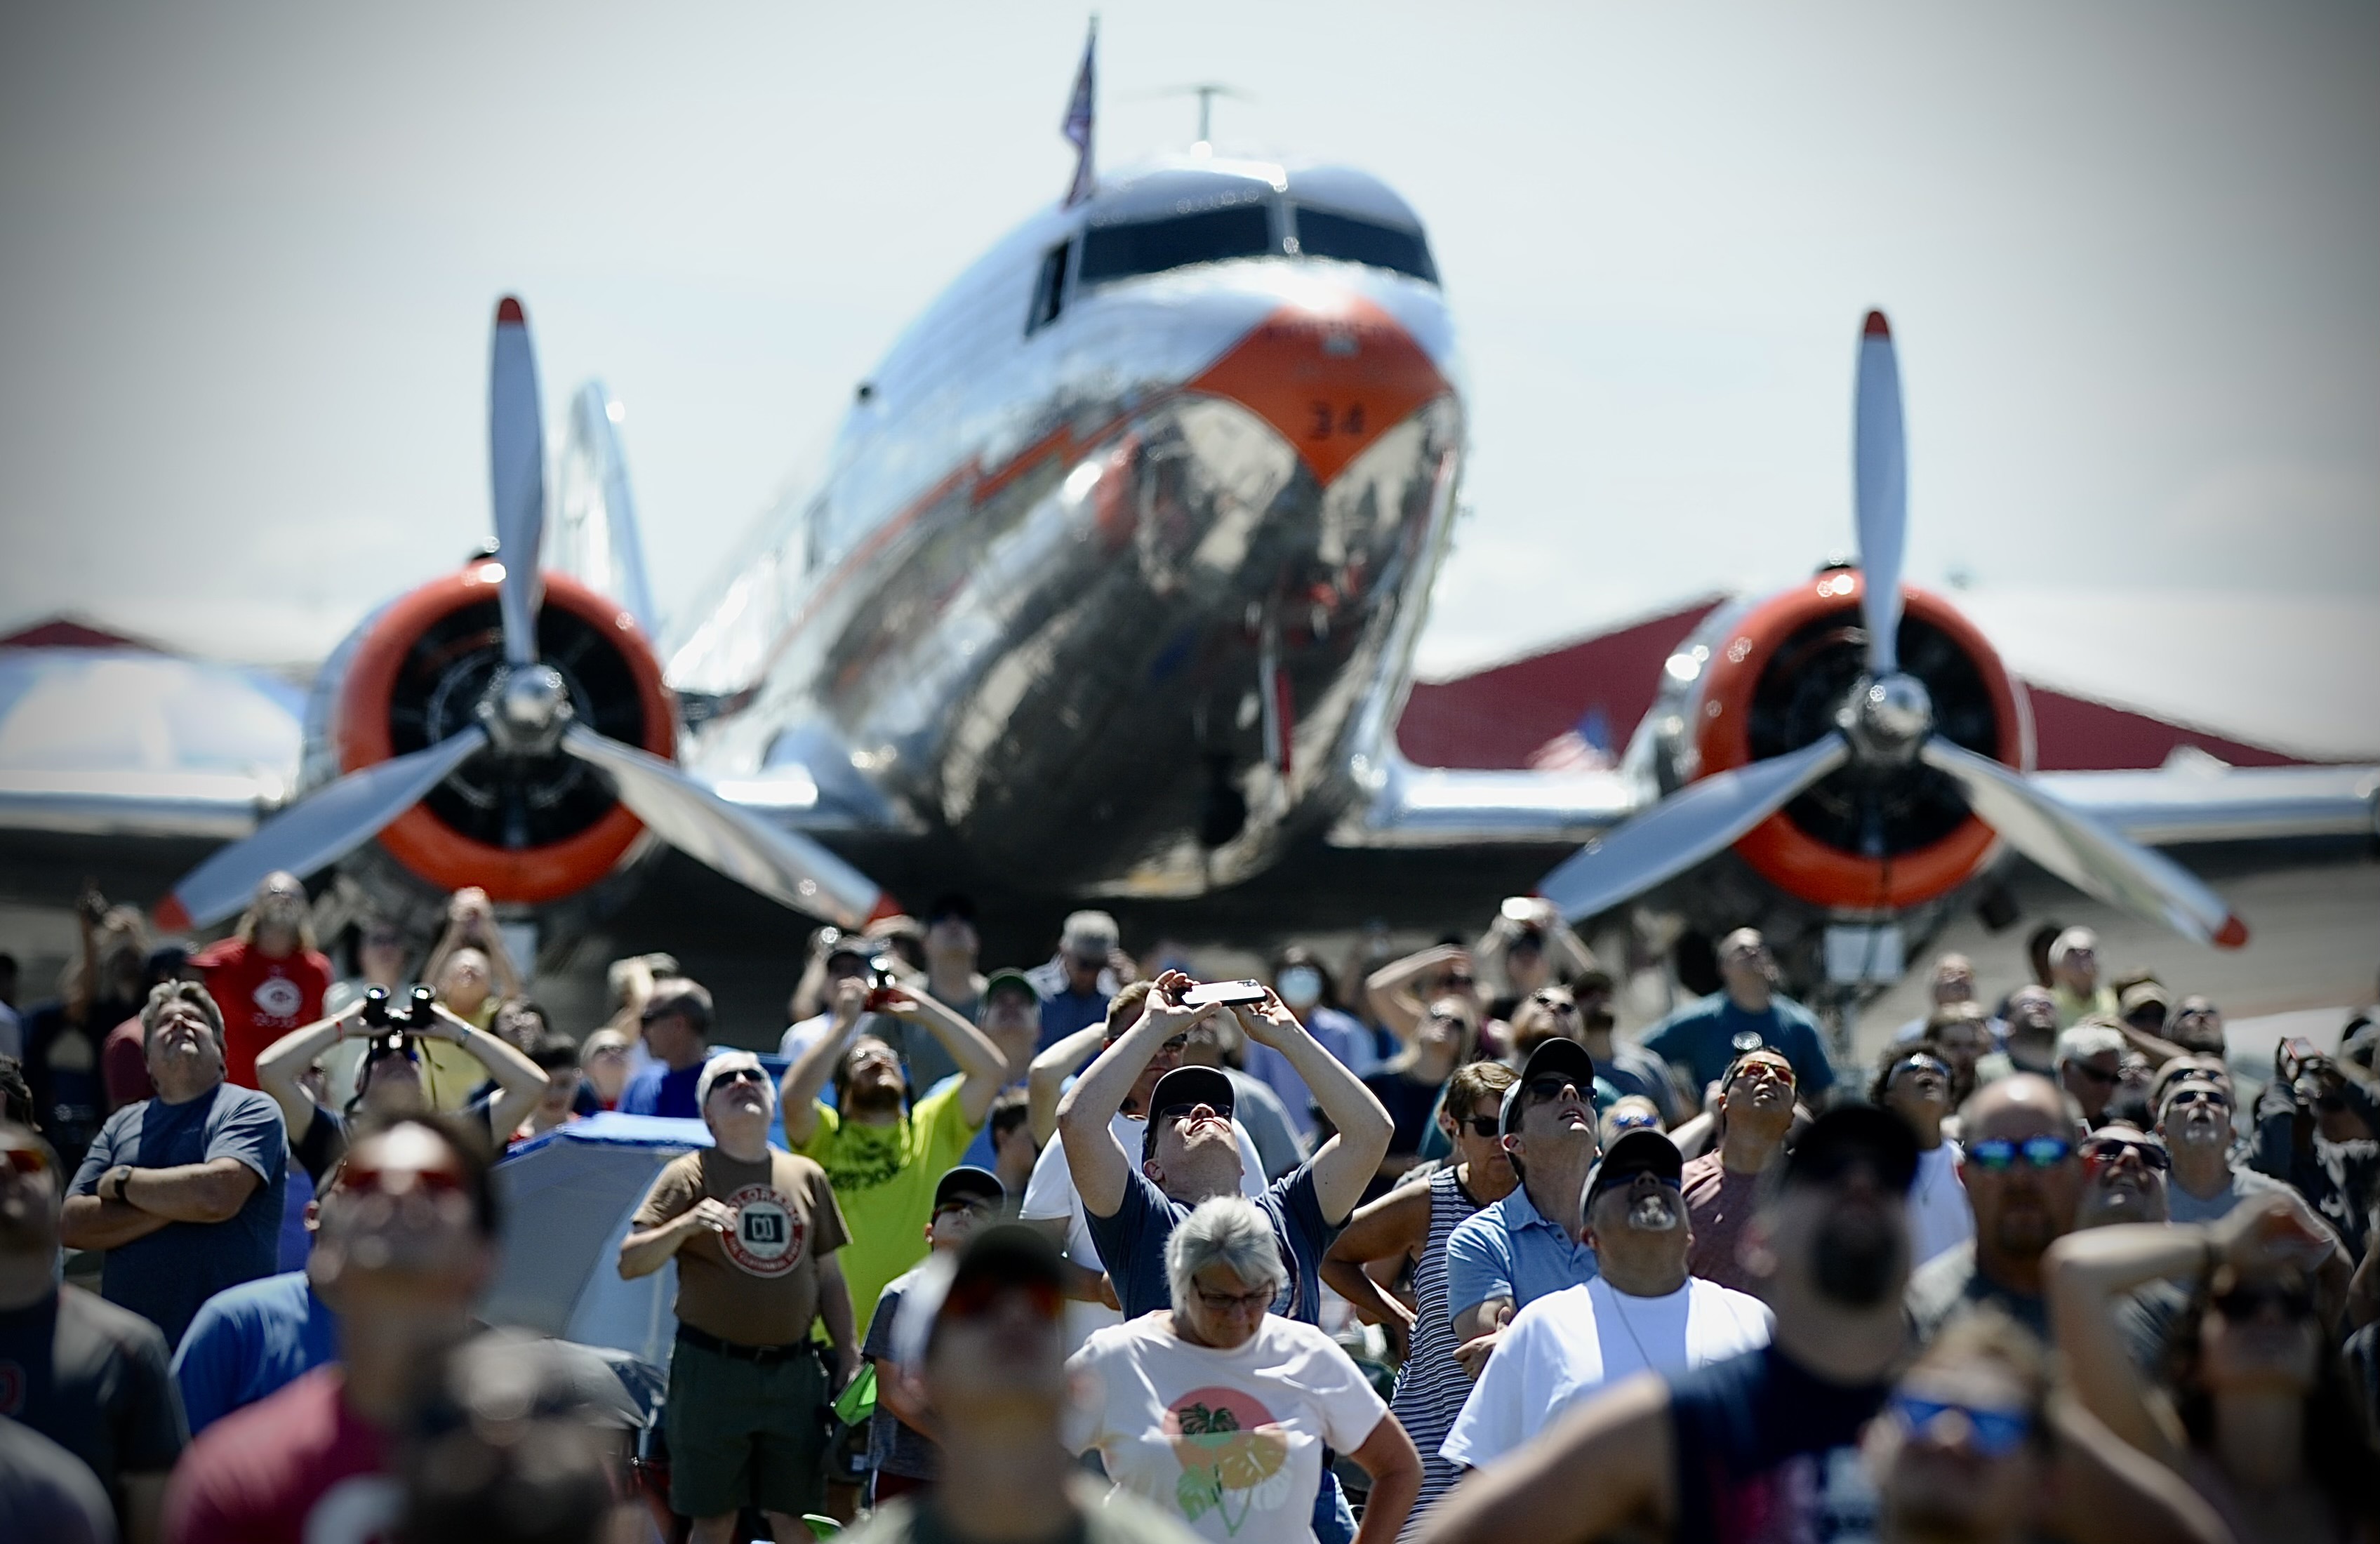 Dayton Air Show opens Saturday to blue skies